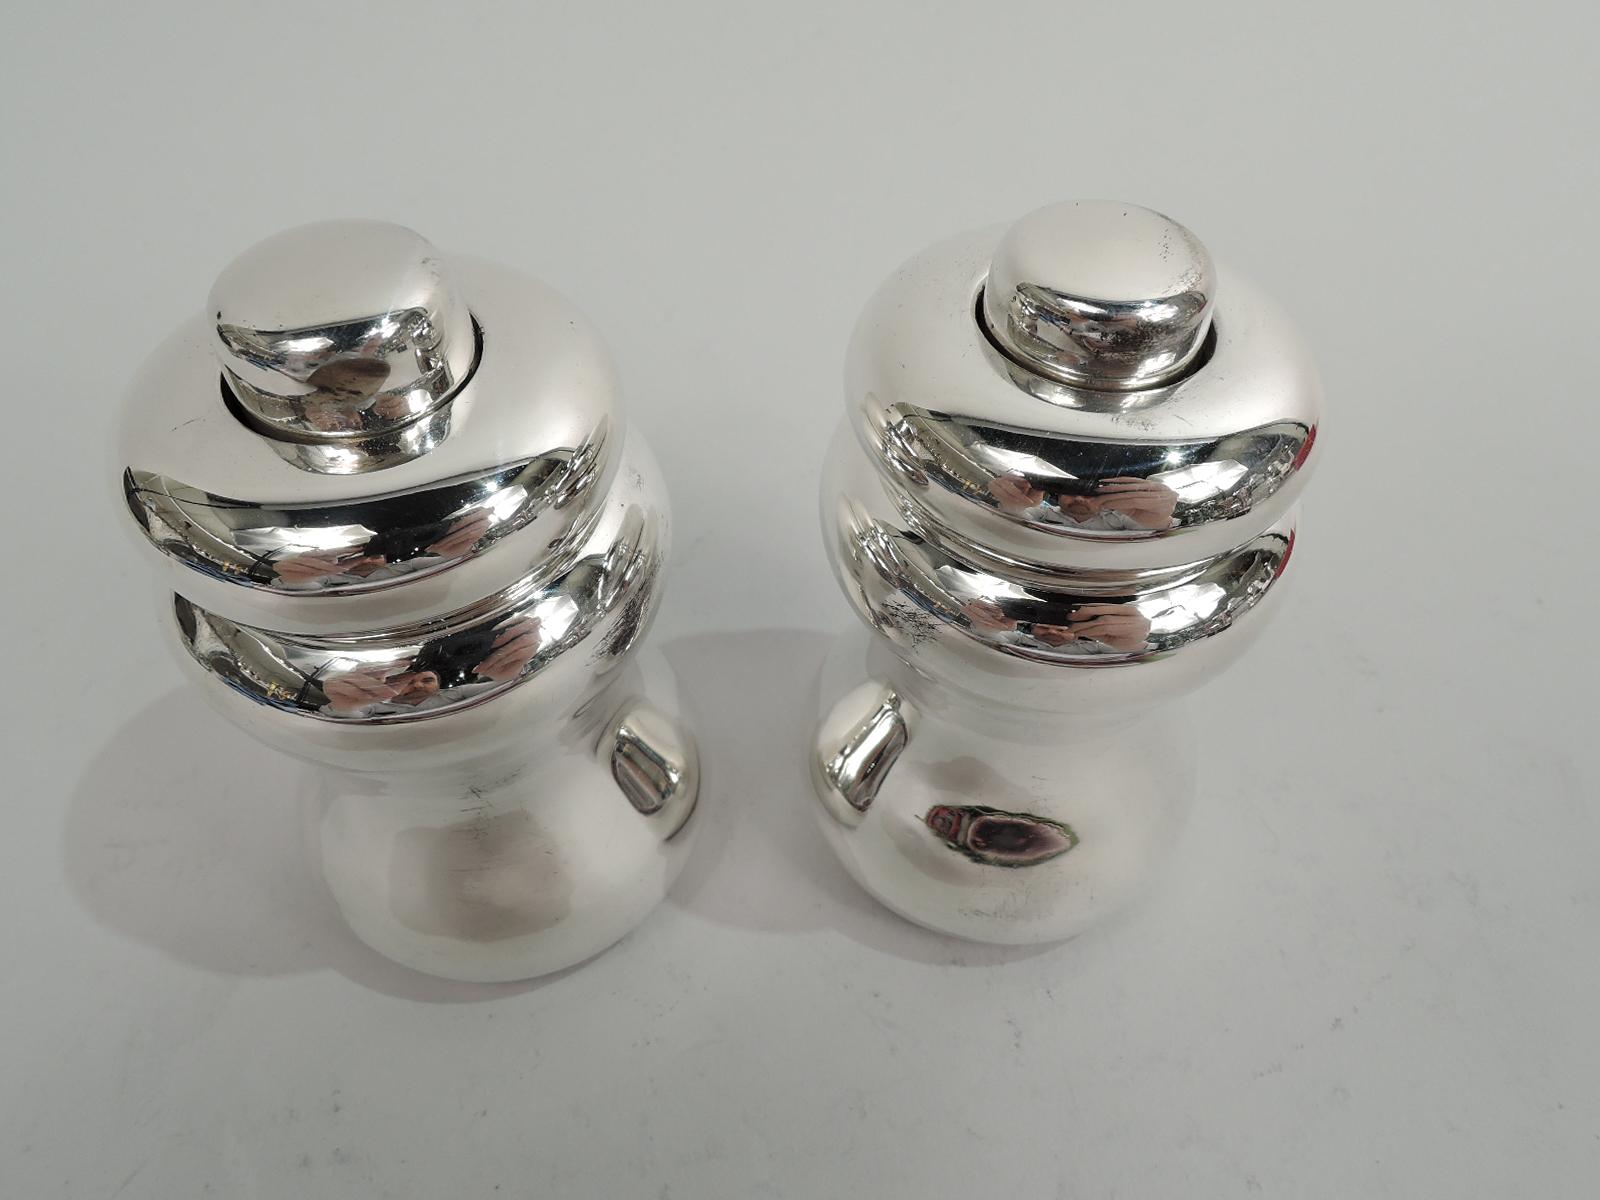 Pair of American Modern sterling silver pepper mills, ca 1930. Retailed by Cartier in New York. Waisted with rotating bun top and button finial. Fully marked including maker’s (Currier & Roby) and retailer’s stamps, and no. 5208A. Hardware marked